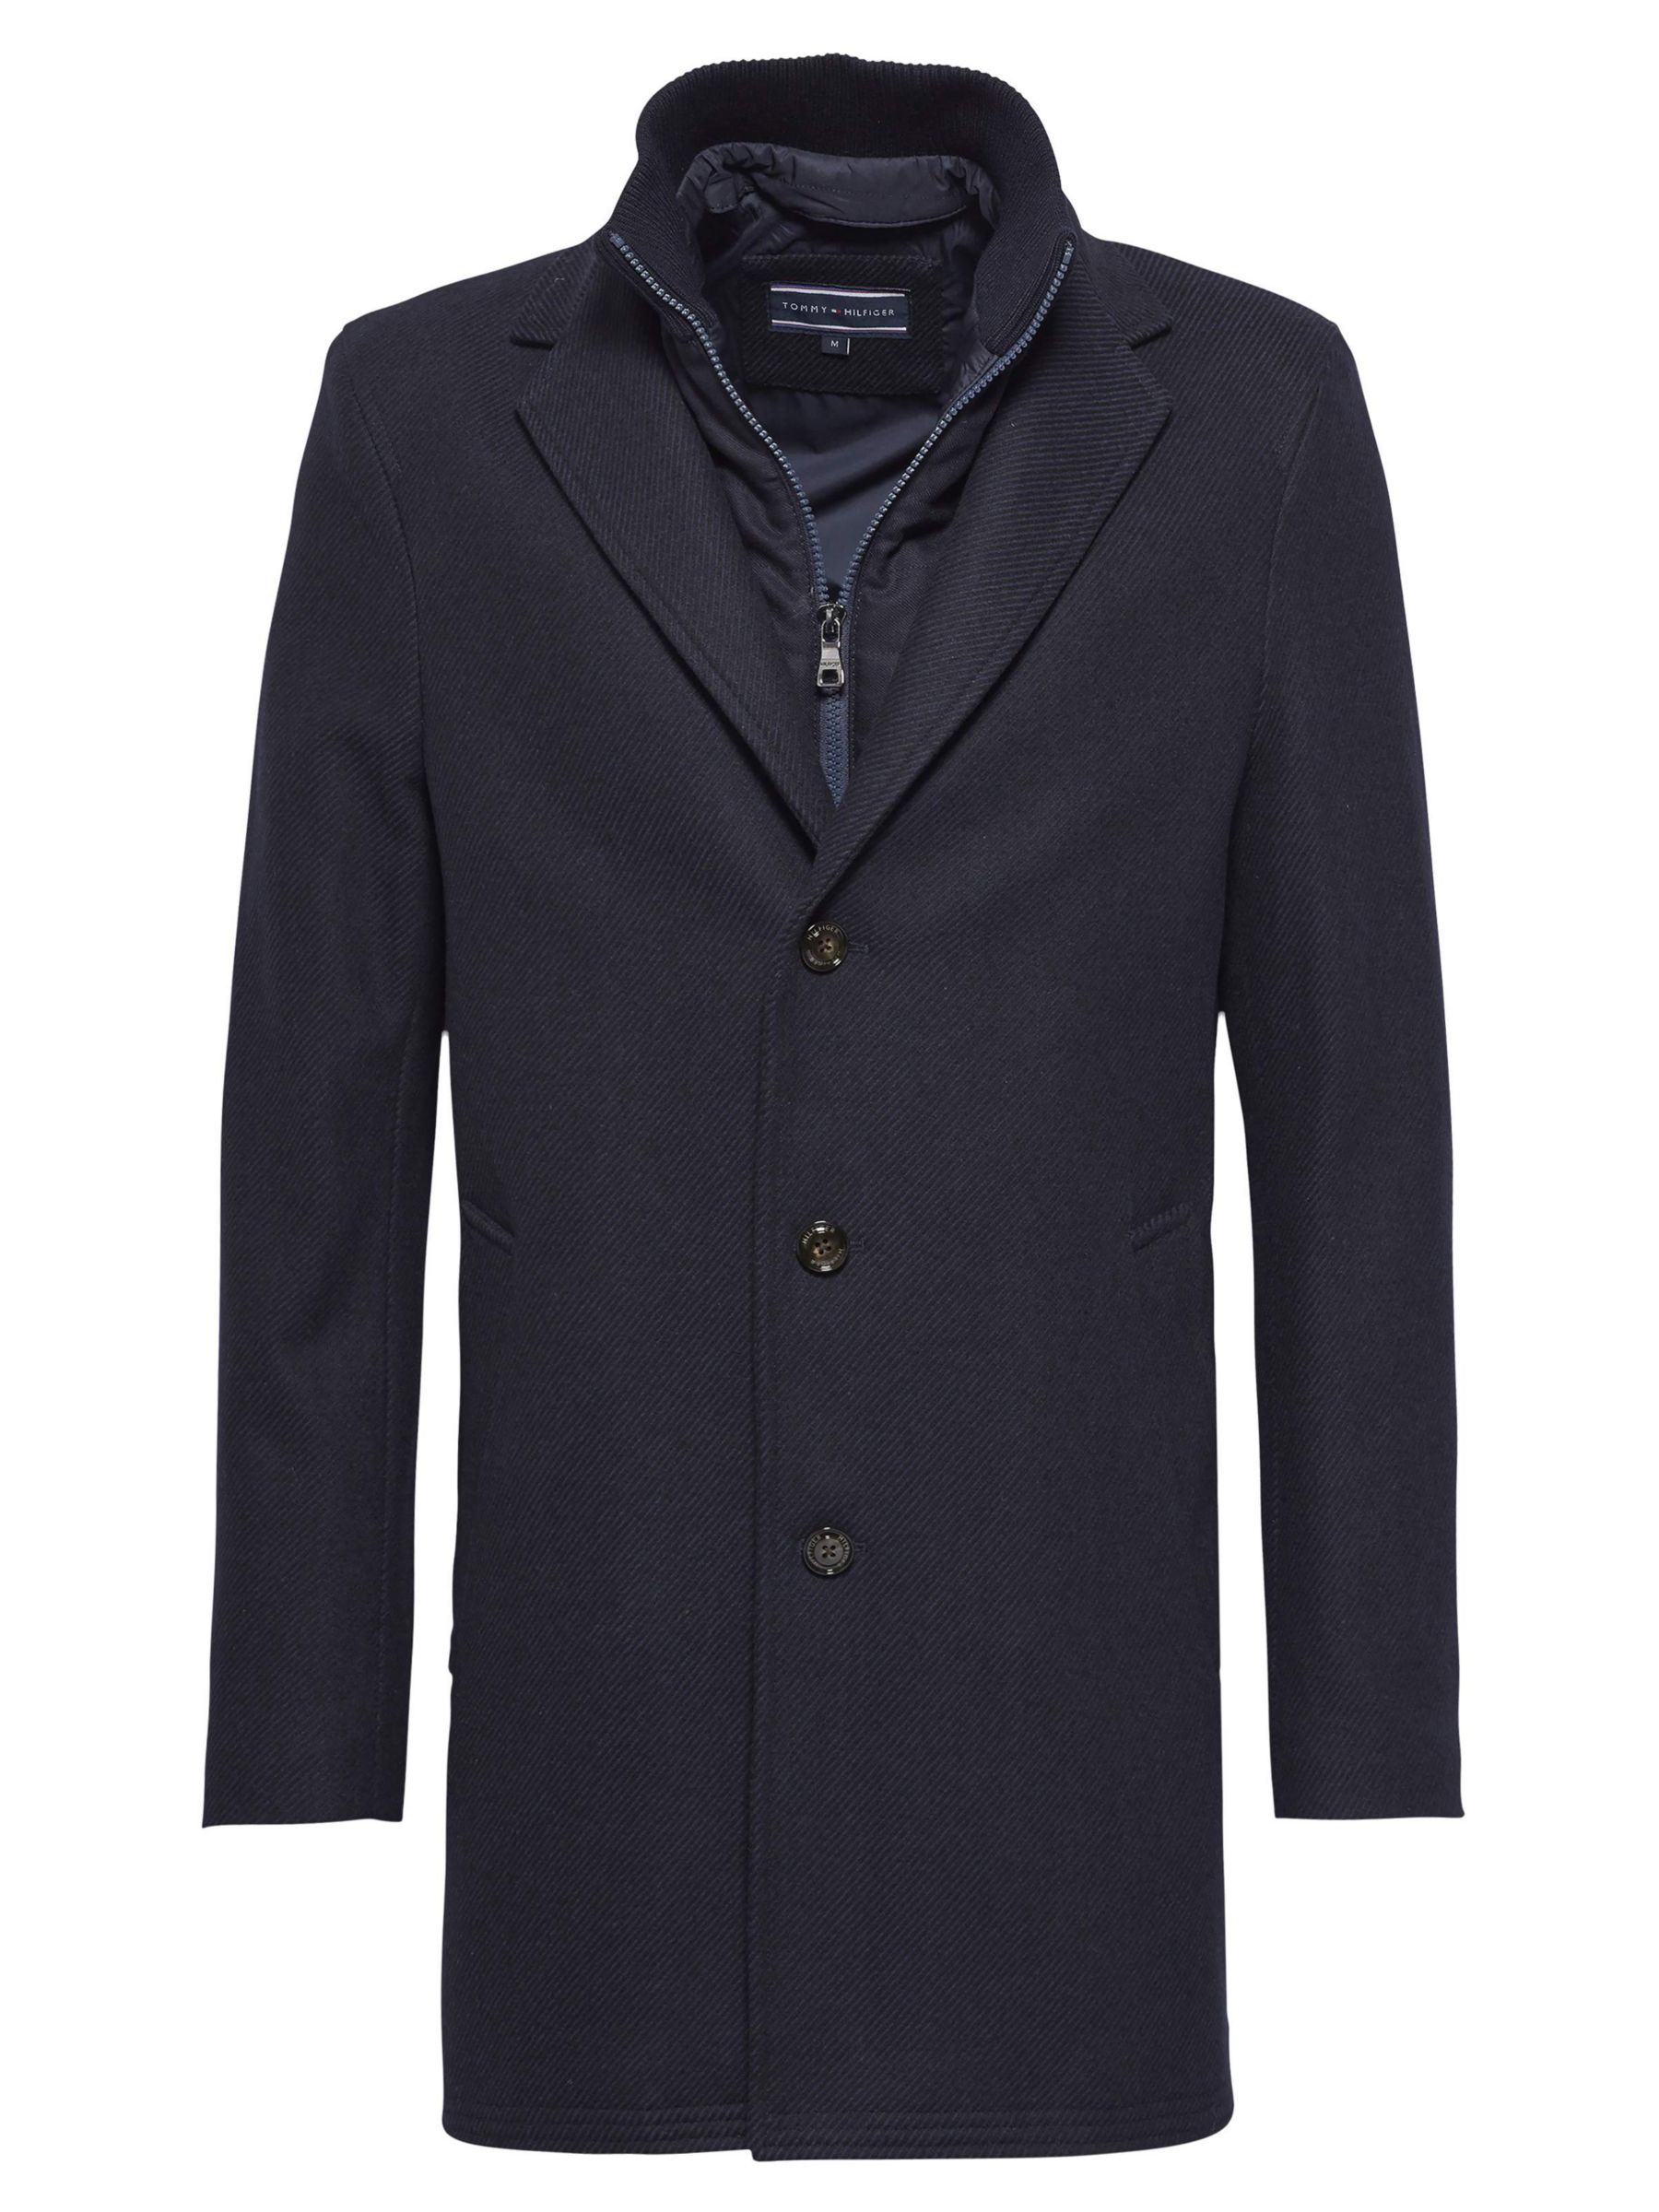 Tommy Hilfiger Chase Twill Overcoat, Sky Captain at John Lewis & Partners